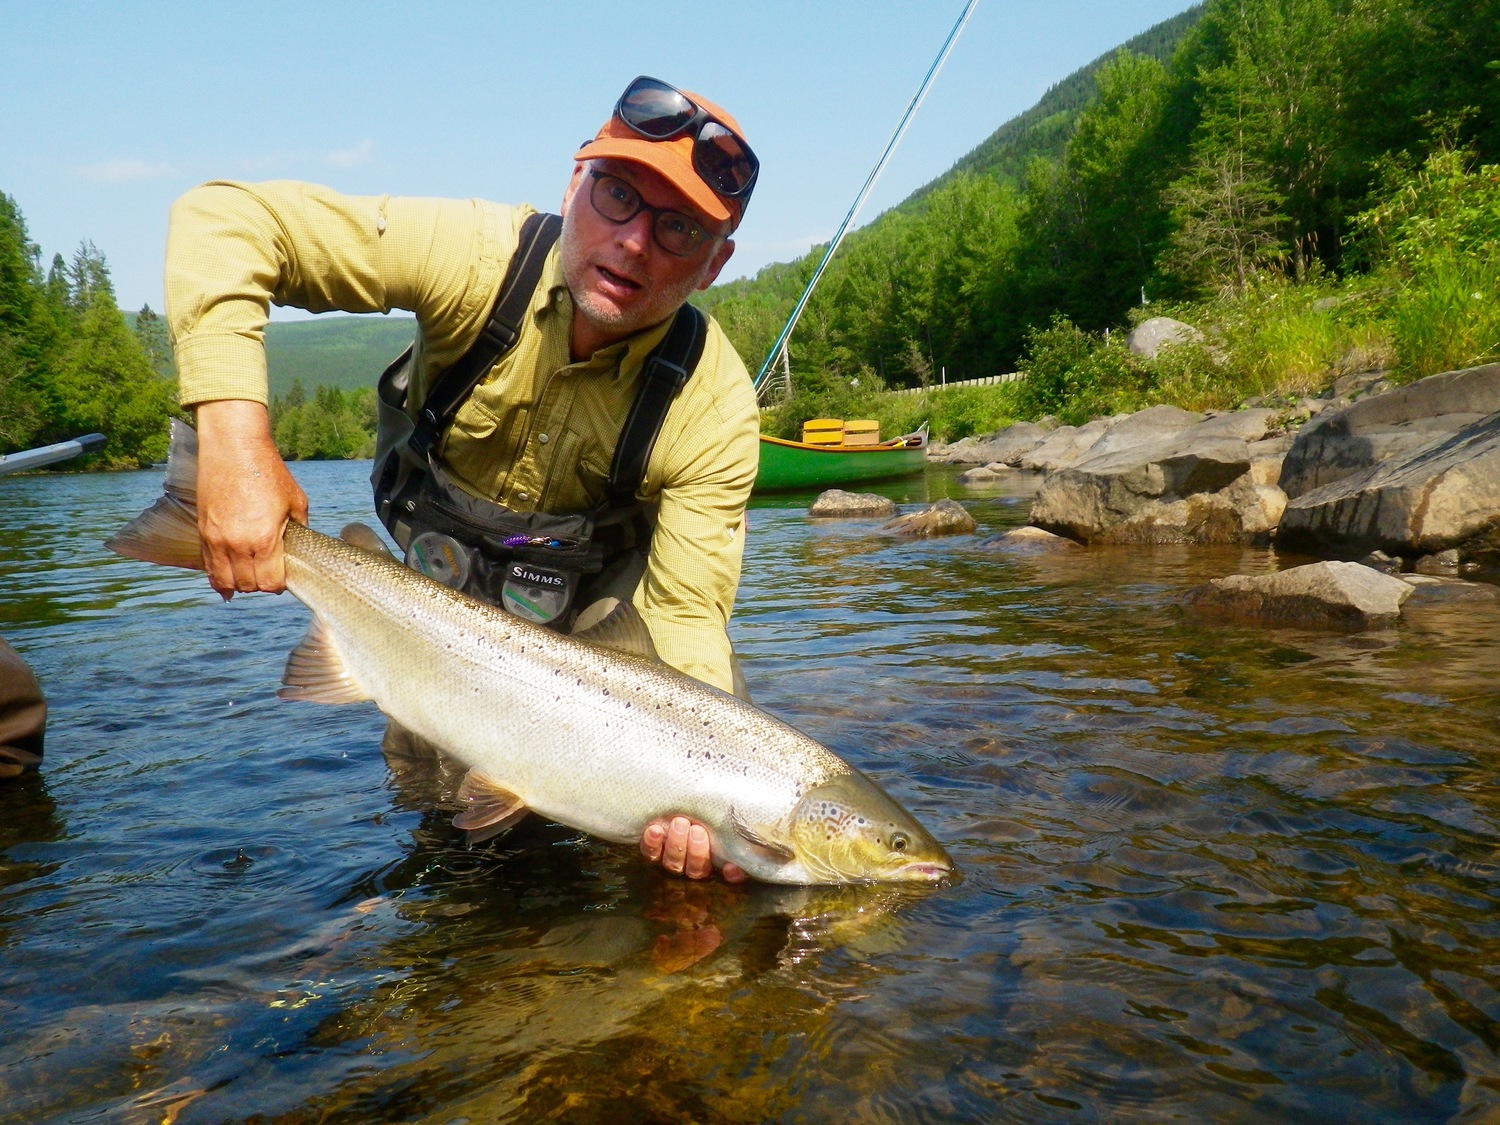 Maurice lands his first Grand Cascapedia salmon of the week, nice one Maurice! 